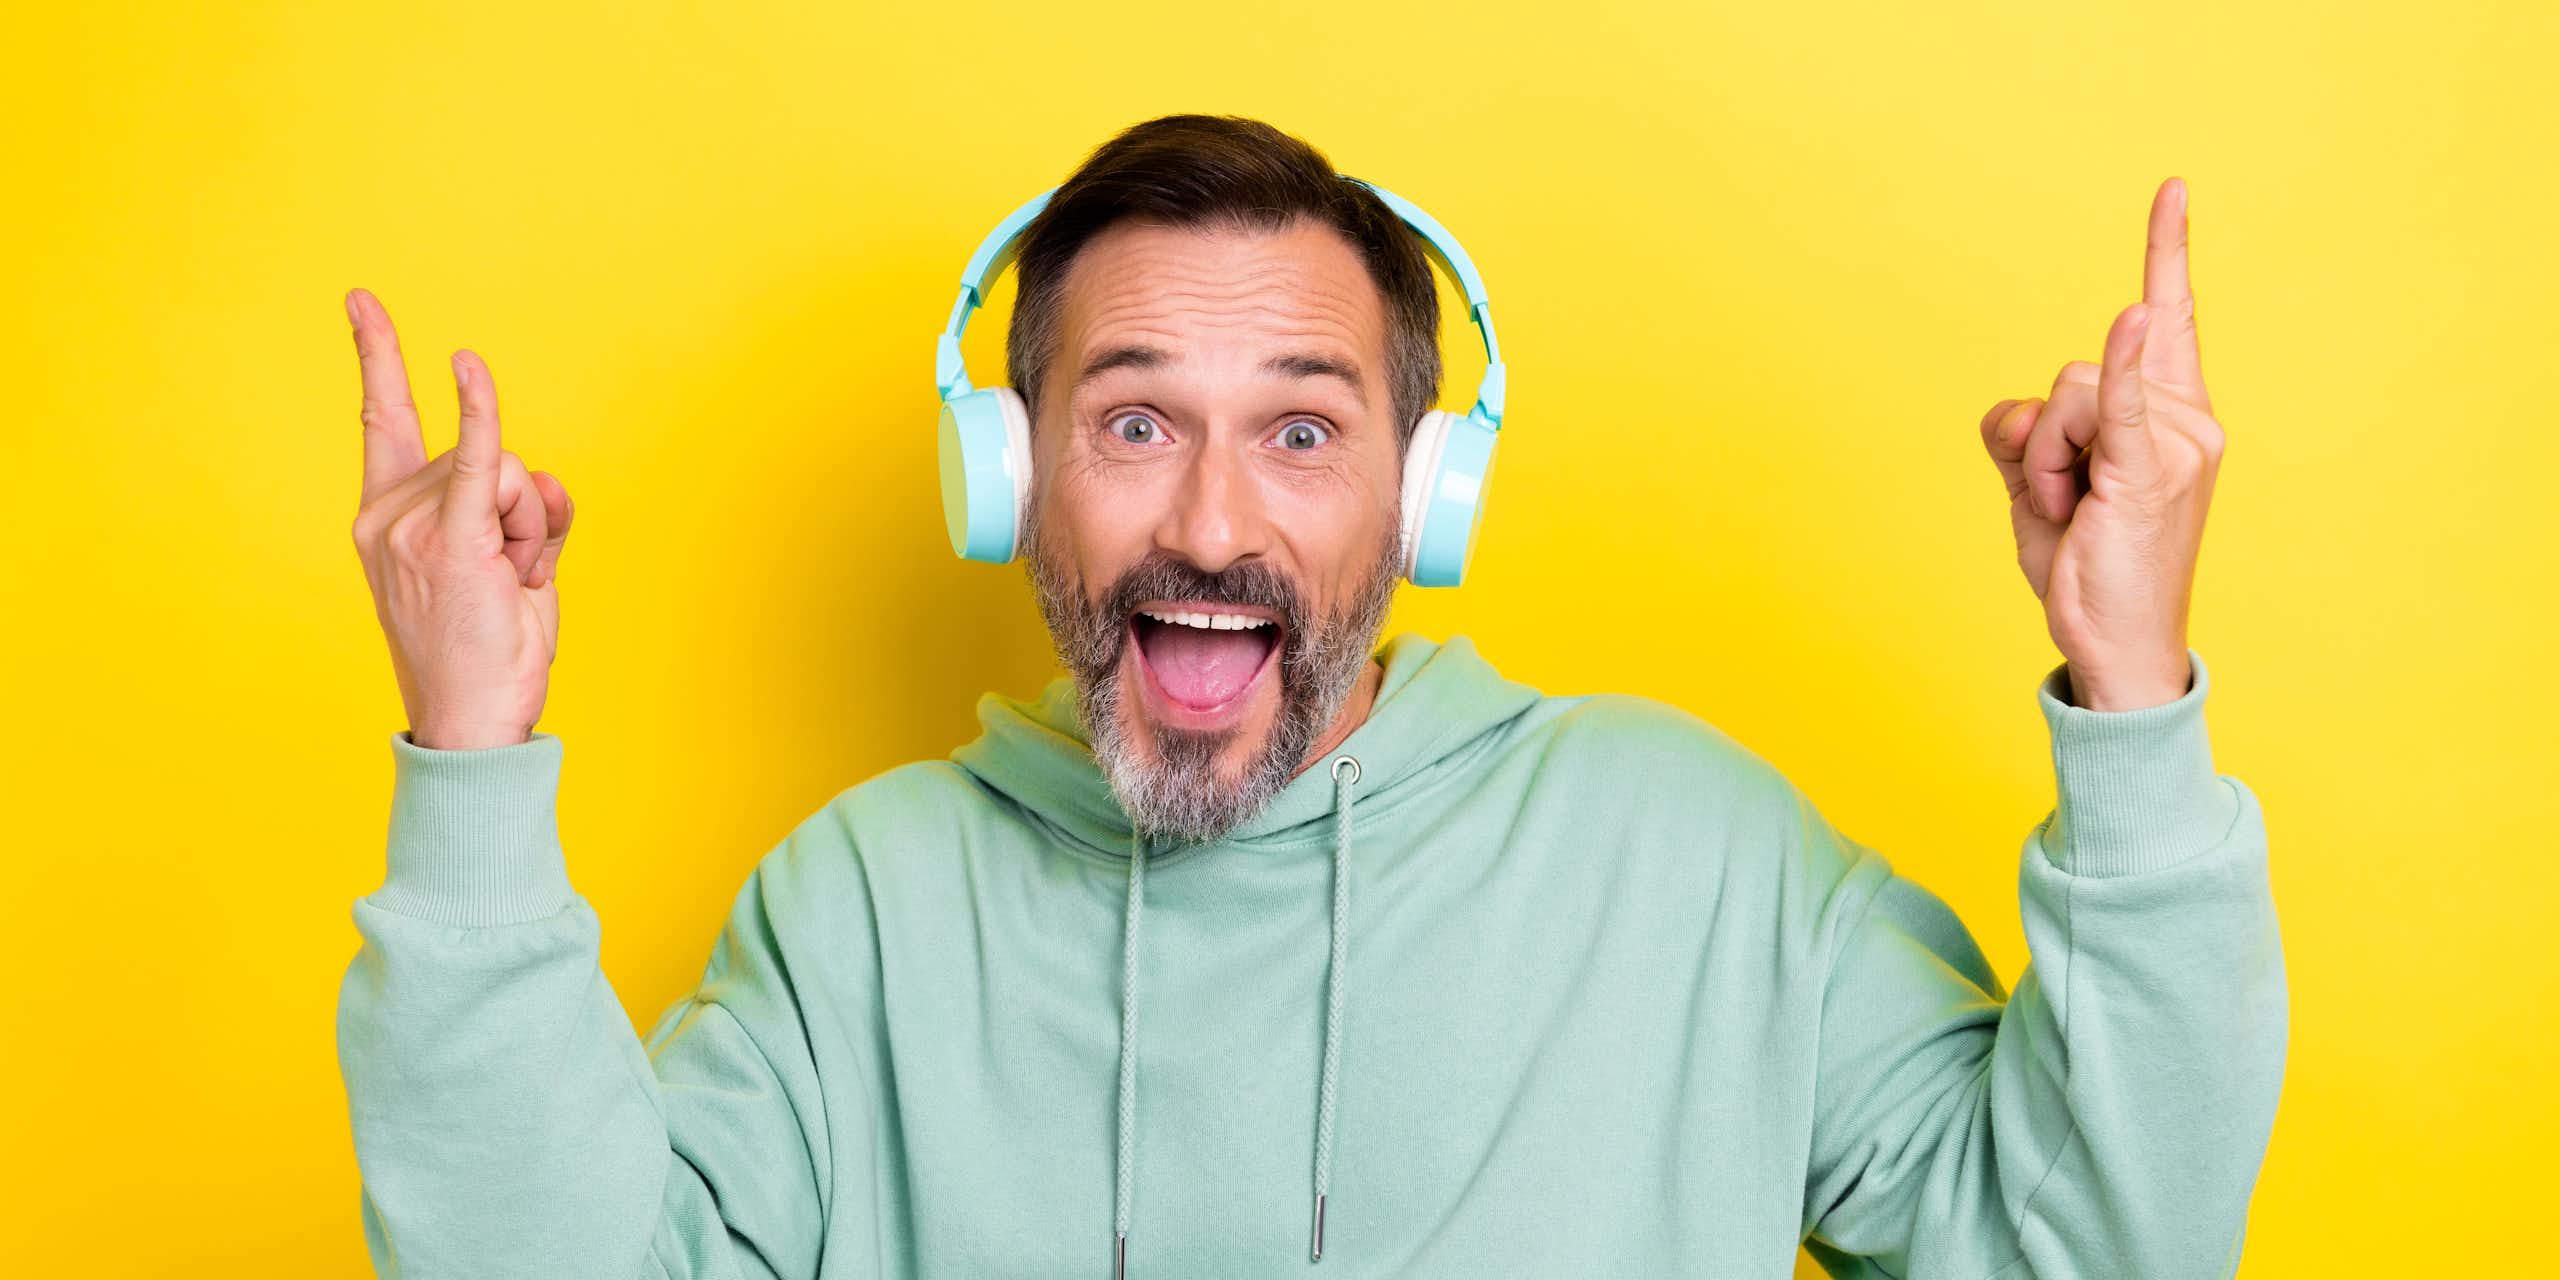 Middle aged man with headphones on